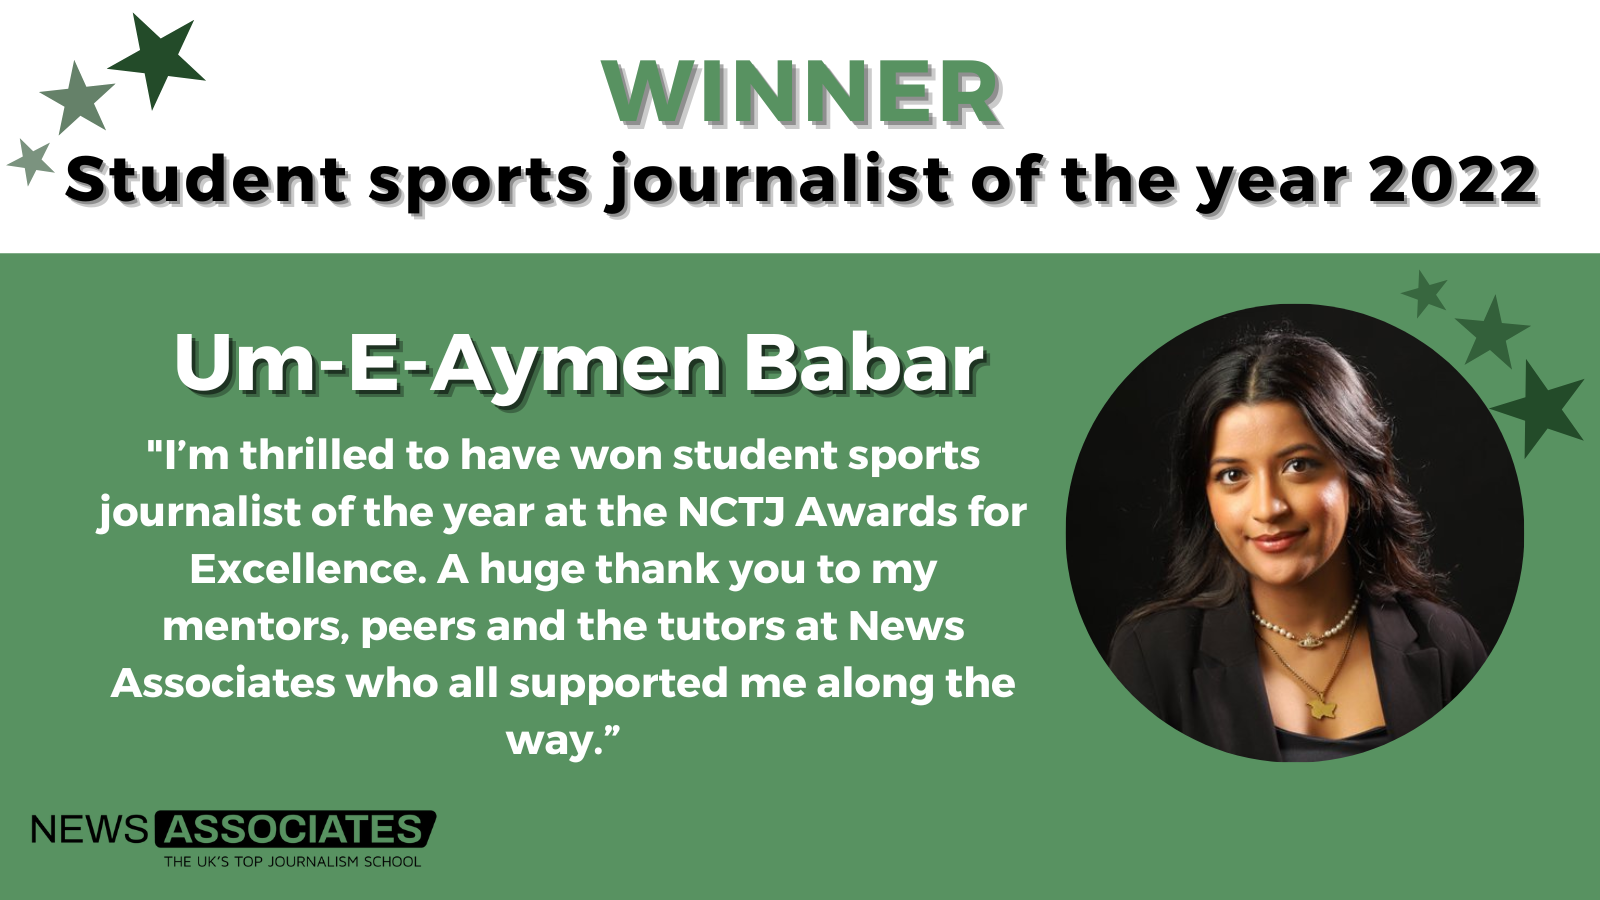 Graphic of Um-E-Aymen Babar winning student sports journalist of the year at the NCTJ awards for excellence: 